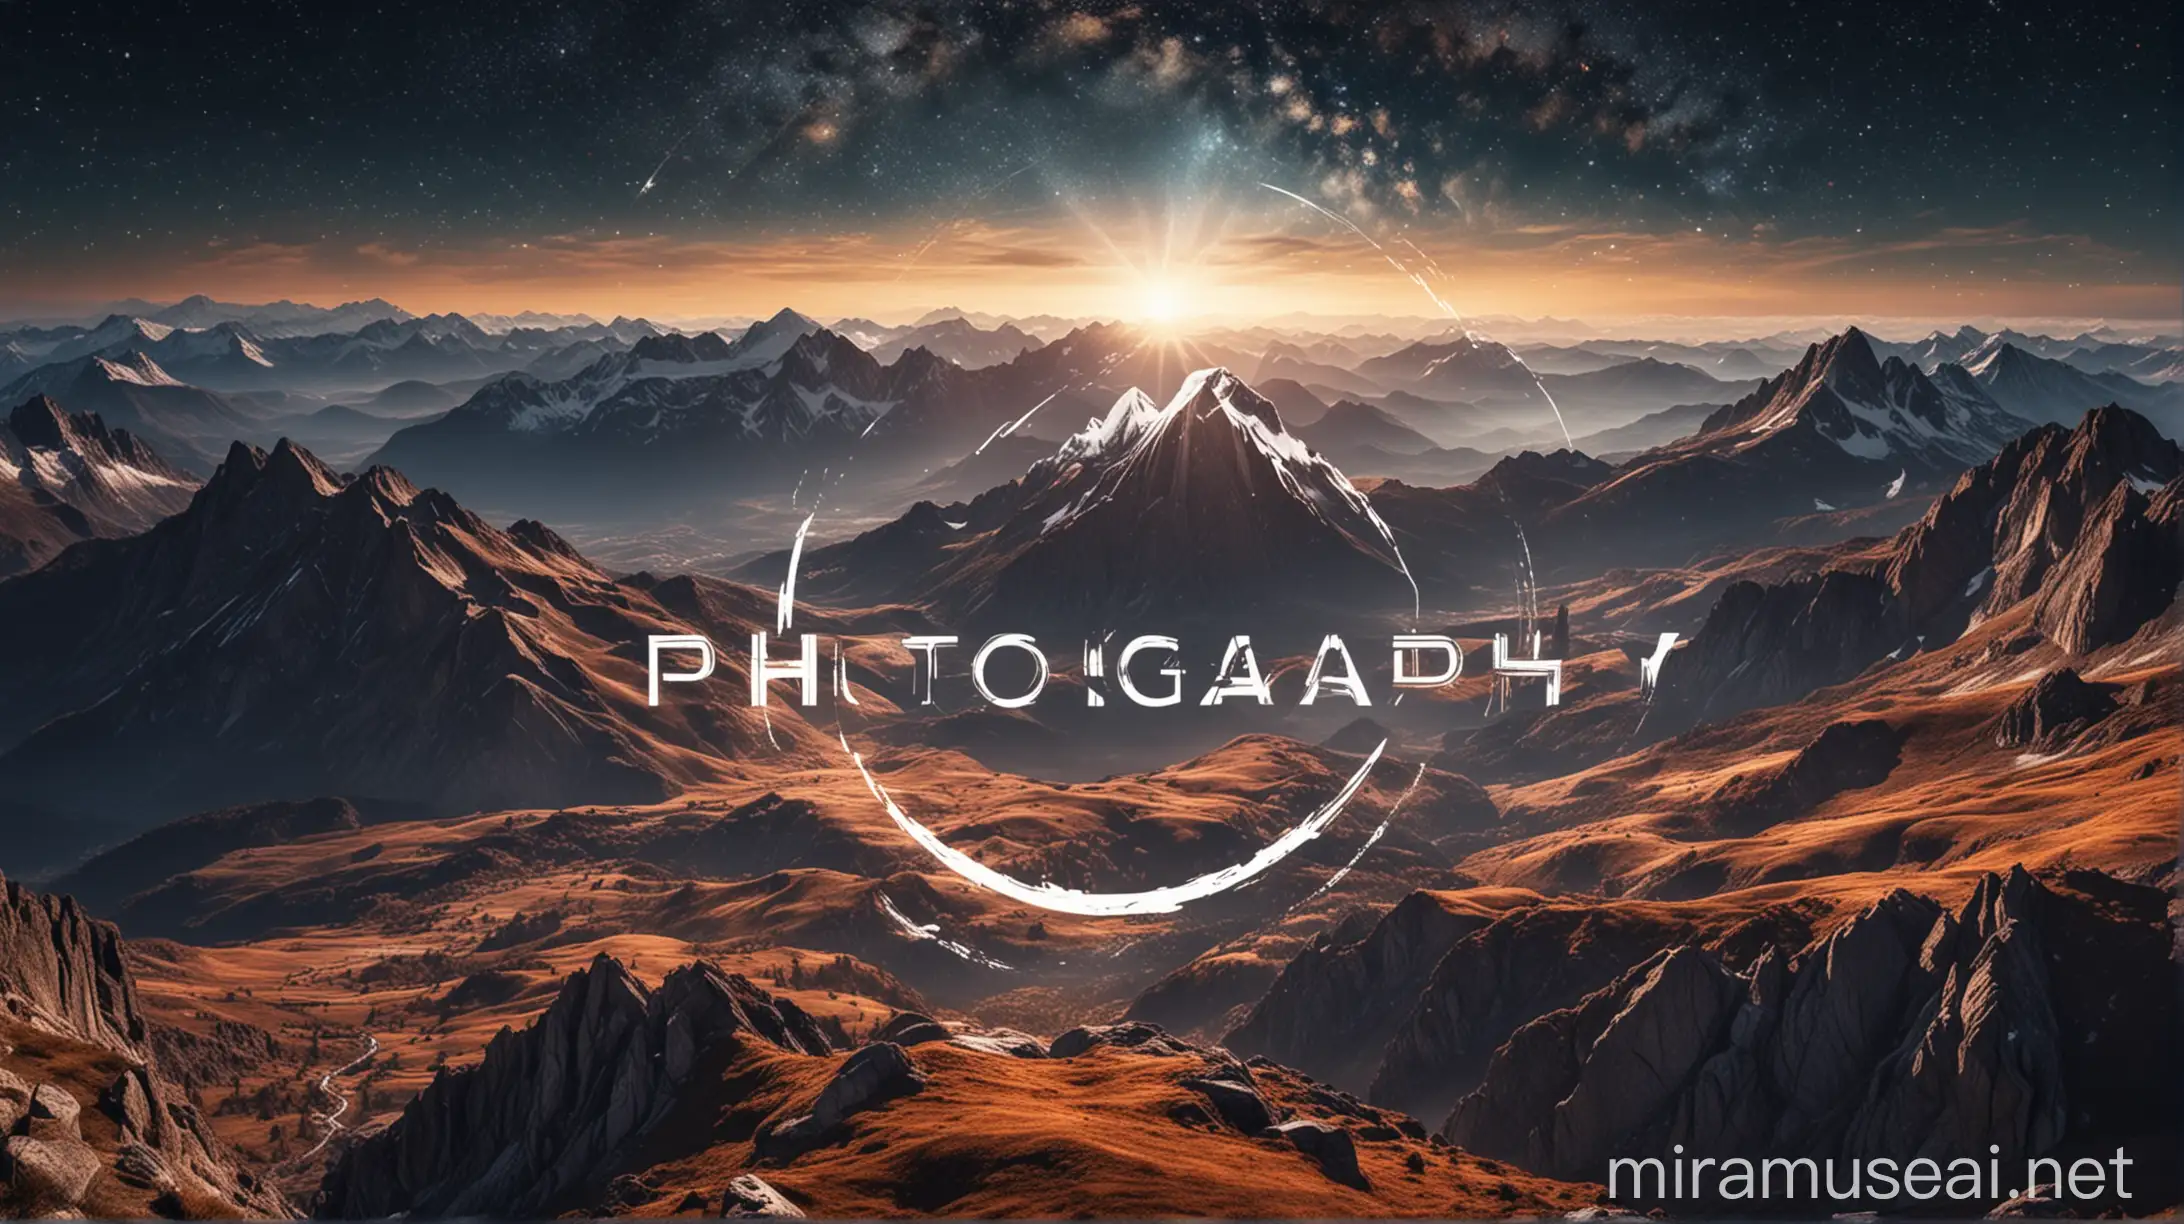 LOGO FOR PHOTOGRAPHY PAGE, WHERE YOU CAN SEE THE LENS CAPTURING A BEAUTIFUL LANDSCAPE OF MOUNTAINS AND AN INFINITE UNIVERSE IN 16K